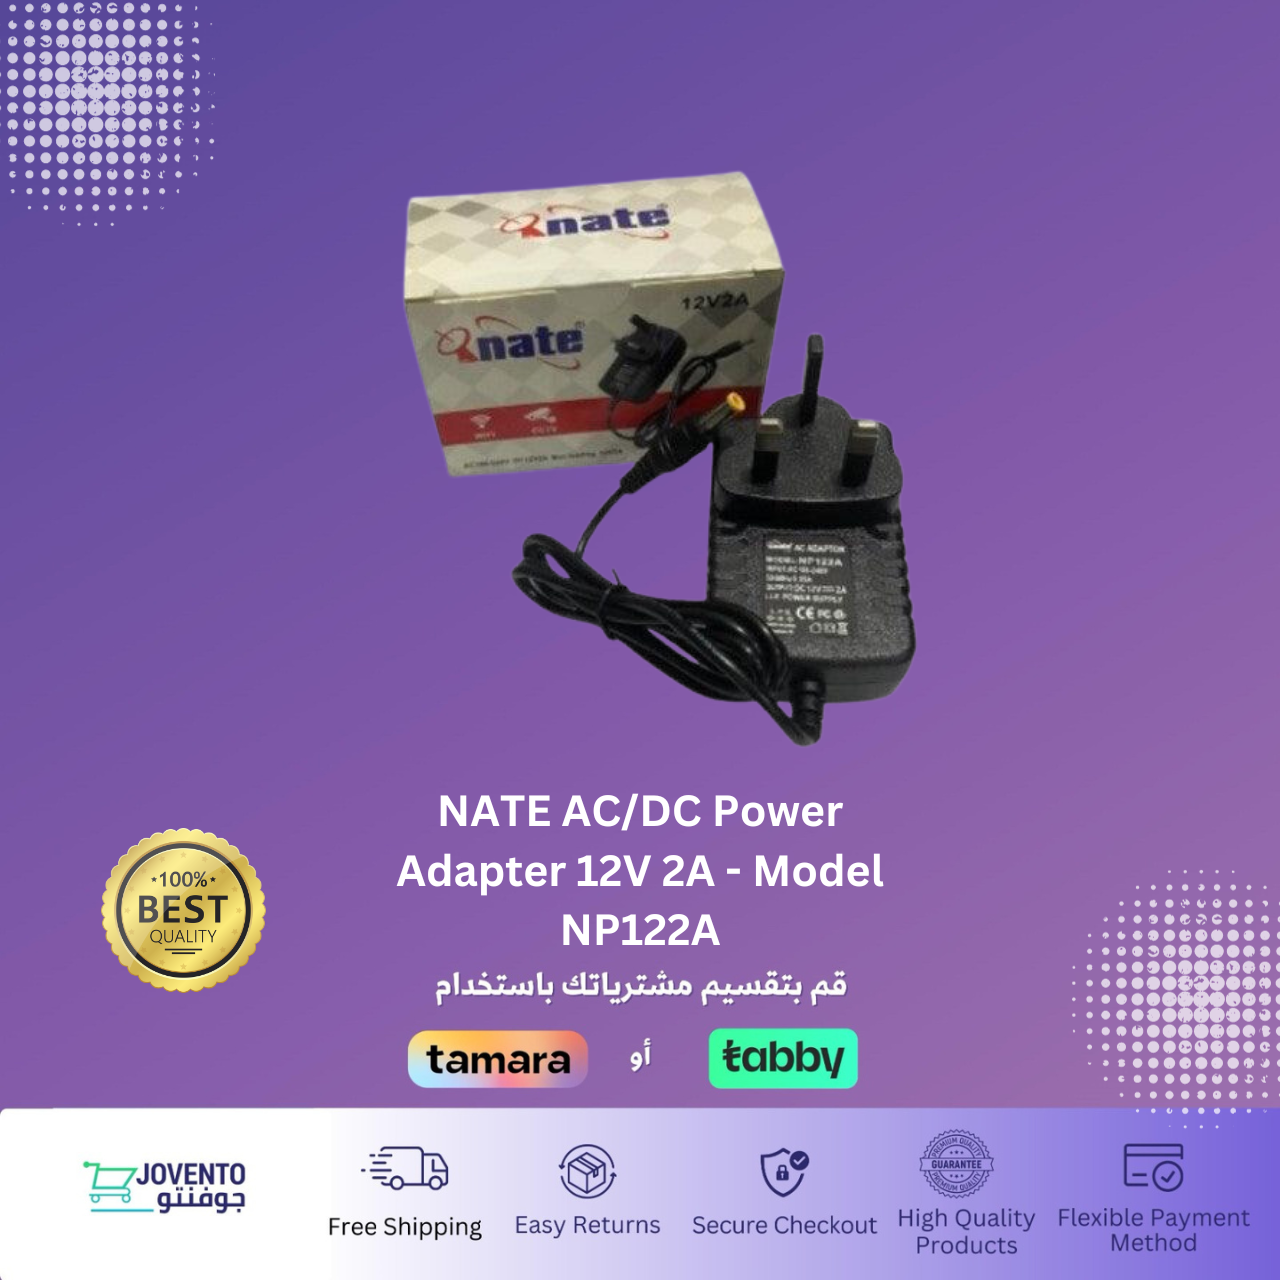 NATE AC/DC Power Adapter 12V 2A - Model NP122A